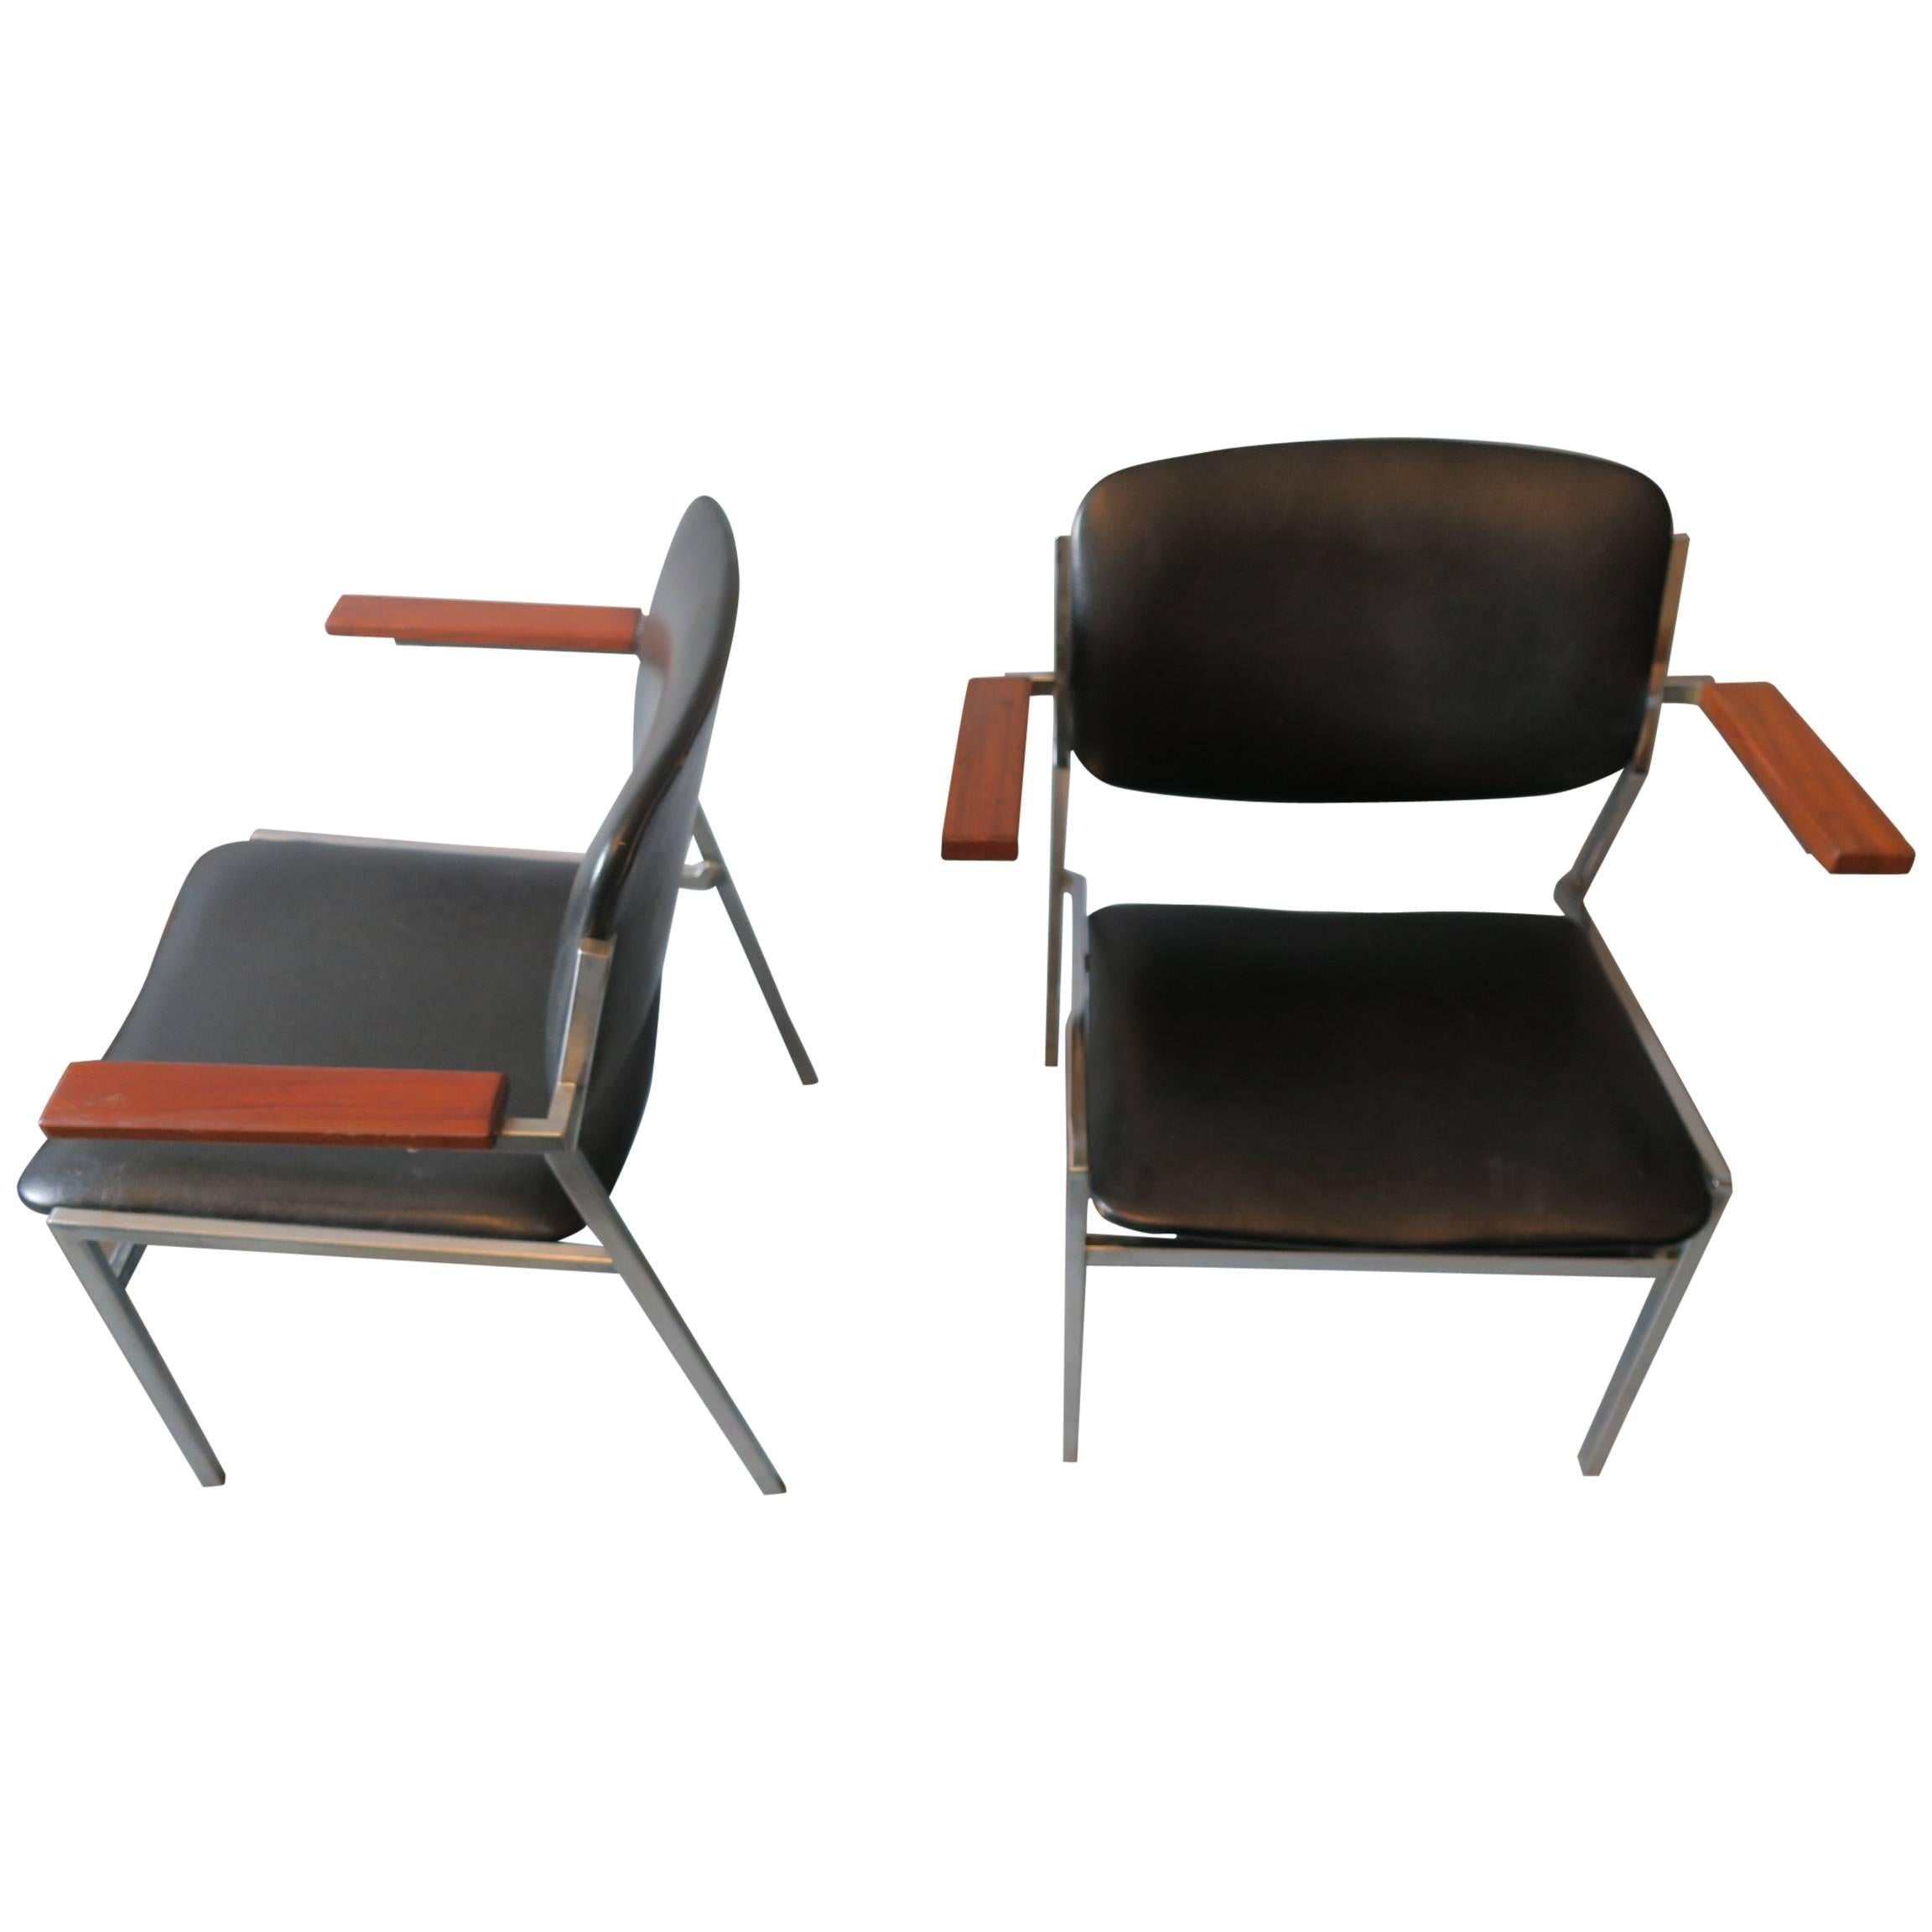 Pair of Low Cocktail Chairs Martin Visser Style, 1960s For Sale